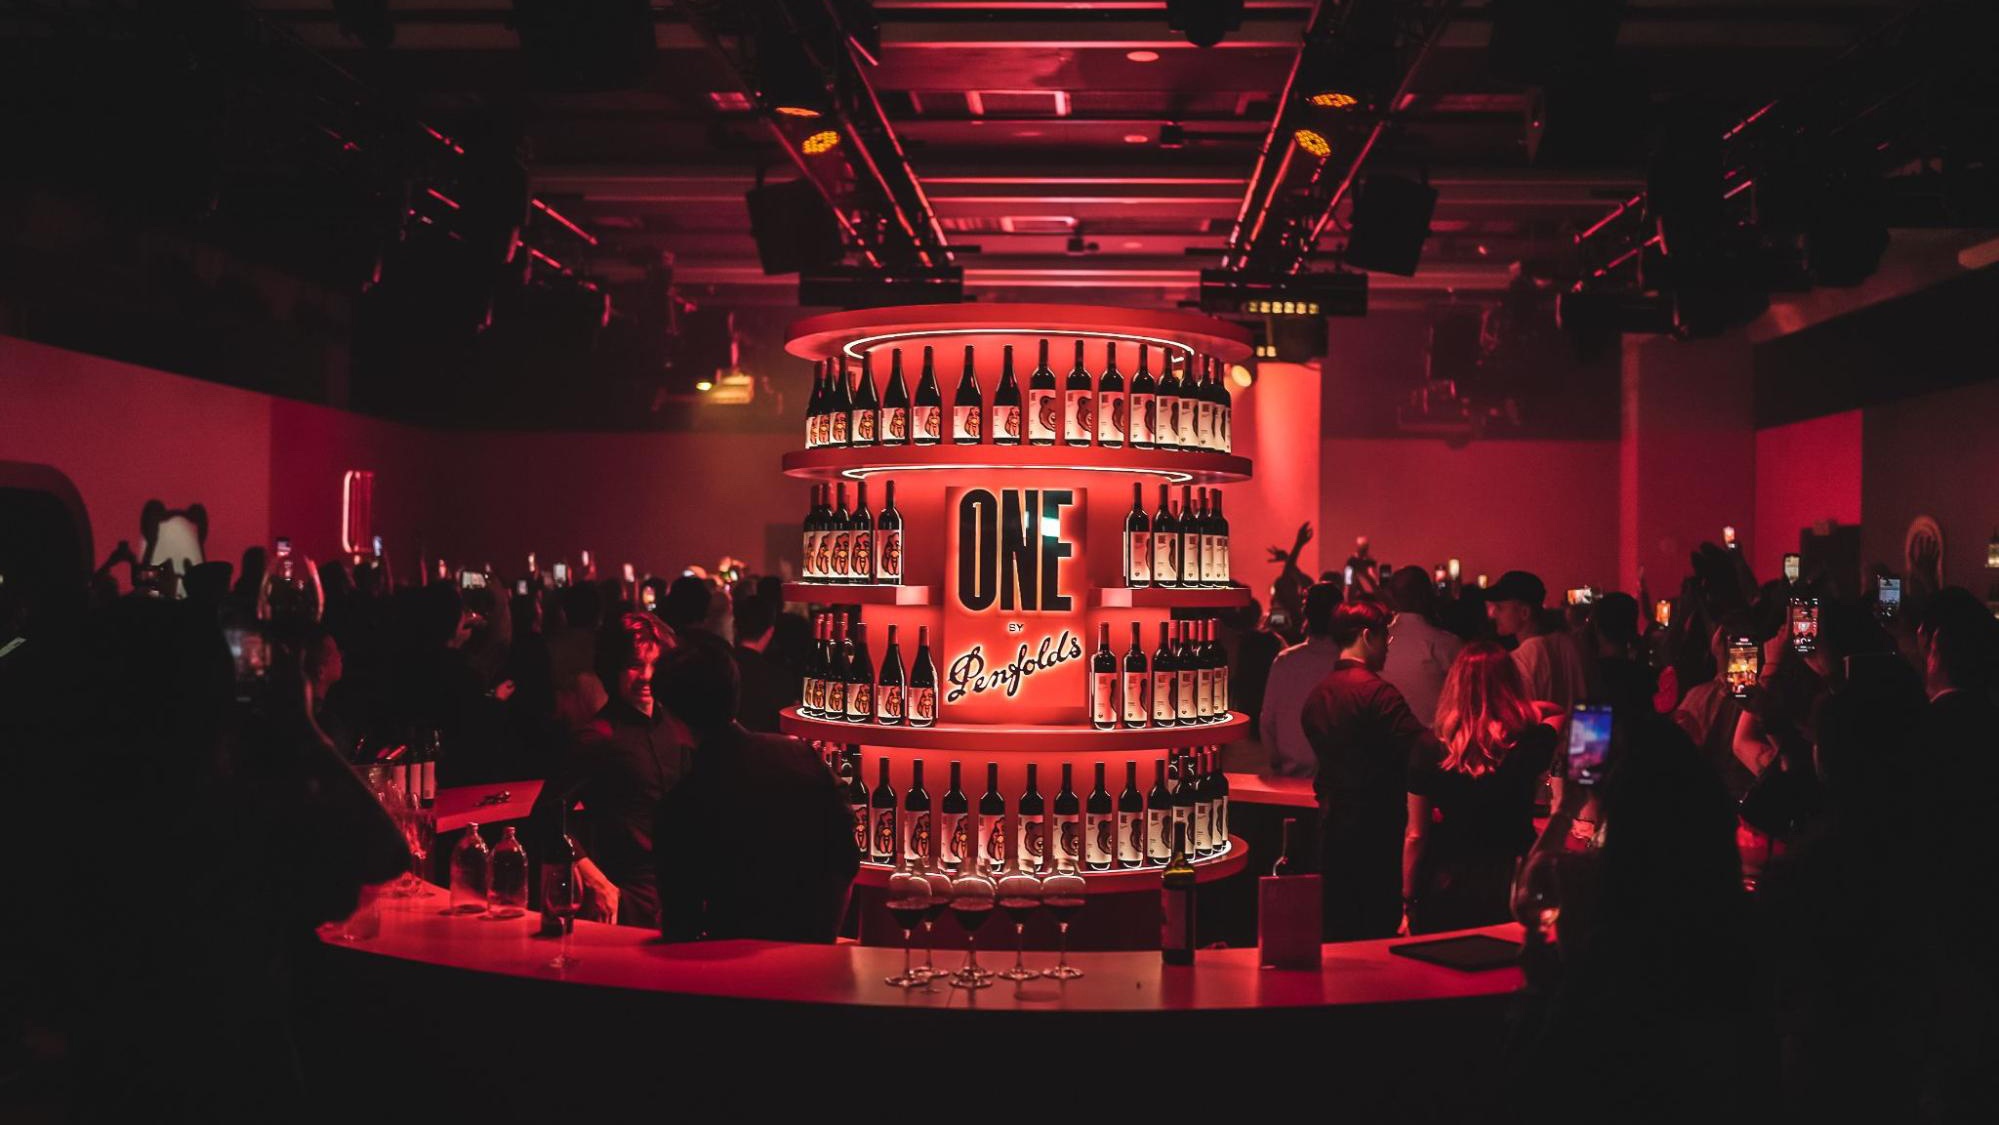 Like the One by Penfolds range, the global launch party provided an integrated experience covering creativity, art, fashion, and wine. Photo: Penfolds 